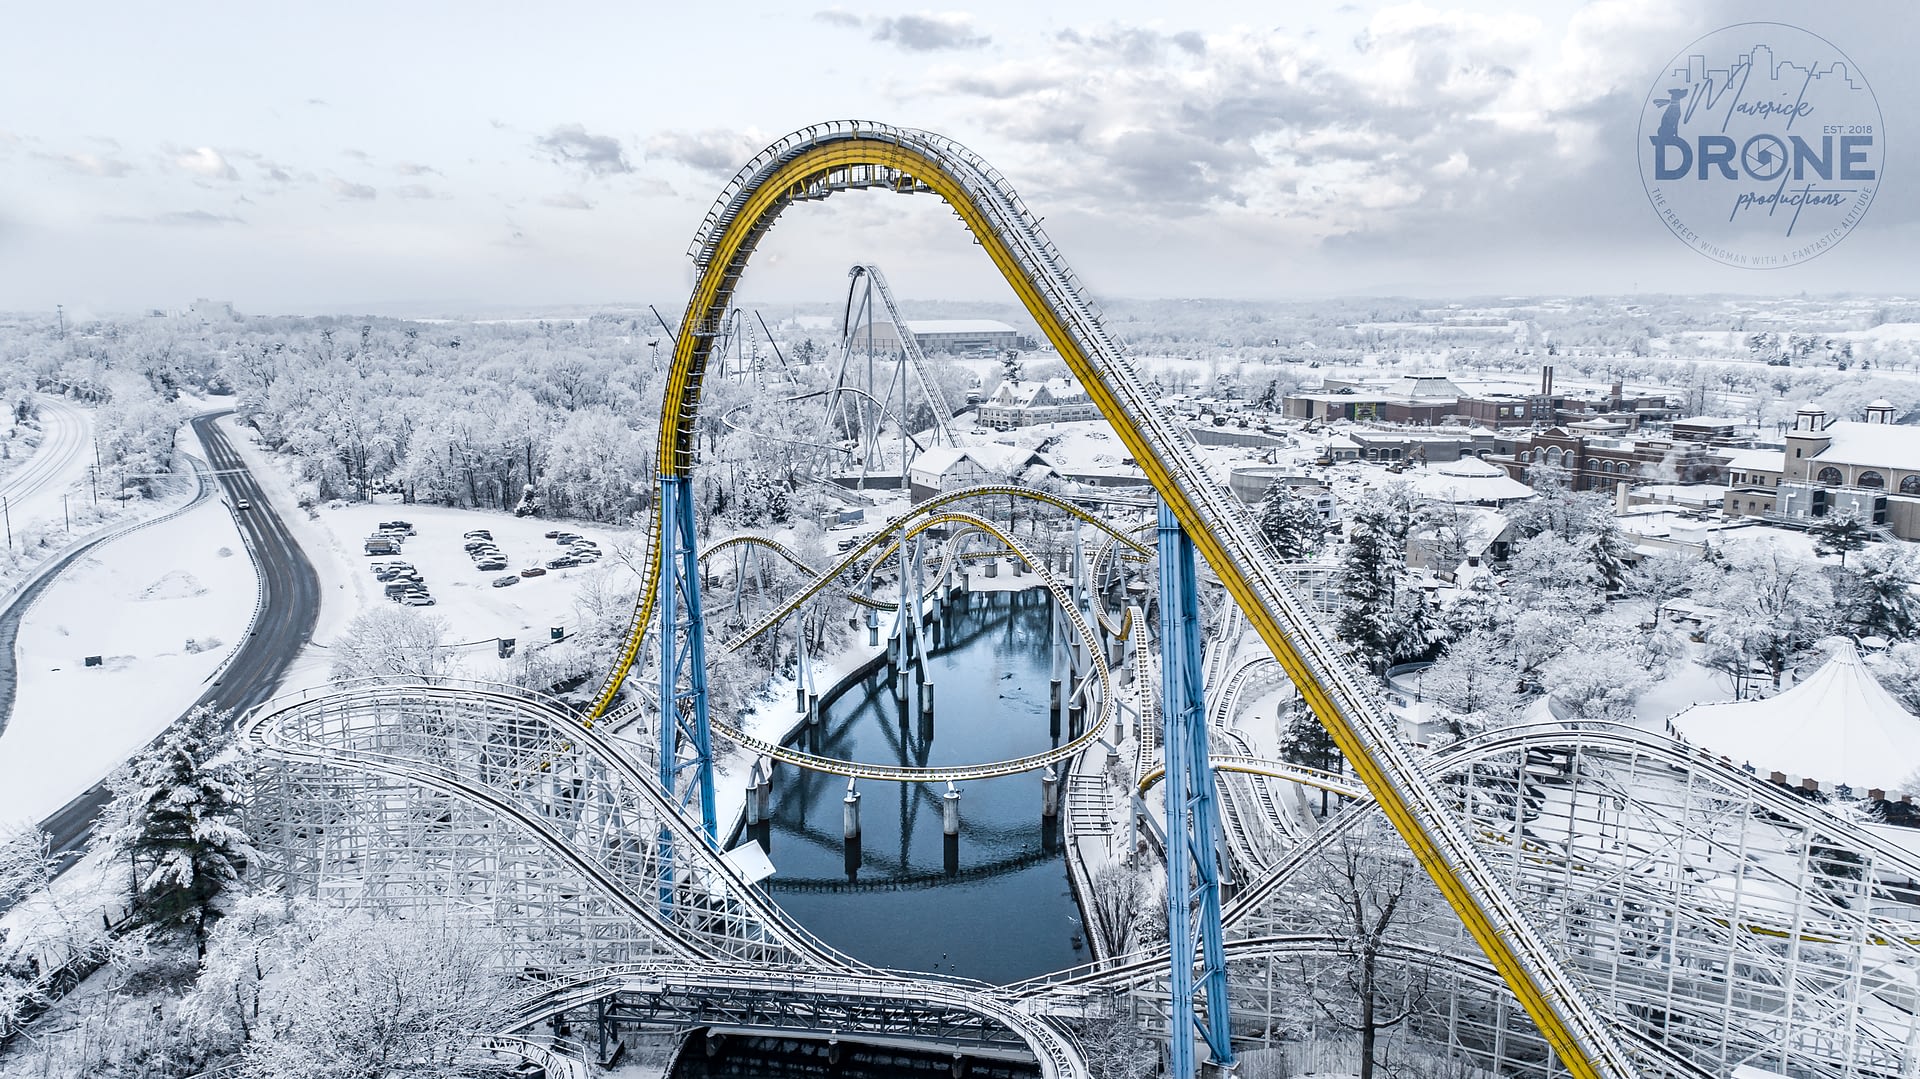 Winter in hershey, sky rush hersheypark, hersheypark sky rush, skyrush, hersheypark snowcovered Downtown hershey, hershey smoke stacks, Hershey sunset, drone hershey, pa’s best drone pilot, aerial photos fo hershey, hershey aerial; aerial of hershey; 717 drone; 717 aerial; hershey drone; Harrisburg aerial photographer; drone travel photographer; aerial travel photographer; harrisburg aerial; lancaster aerial; drone lancaster; halloween aerial; best drone photographer, Harrisburg aerial photographer; travel drone photographer; Harrisburg aerial; drone Hershey; drone harrisburg; york drone; aerial york; lacaster drone; lancaster aerial; camp hill; camp hill drone; camp hill aerial; west shore aerial; city island; drone city island; harrisburg aerial photographer; harrisburg aerial photography; hershey aerial photography; hummelstown aerial; 717 drone; 717 drone guys; best drone photographer in pa; best aerial photographer in pa, hersheypark in winter, snowcovered hershey, snow covered hershey, snow-covered hersheypark, hersheypark snow, hersheypark candylane, candymonium construction, roller coaster drone